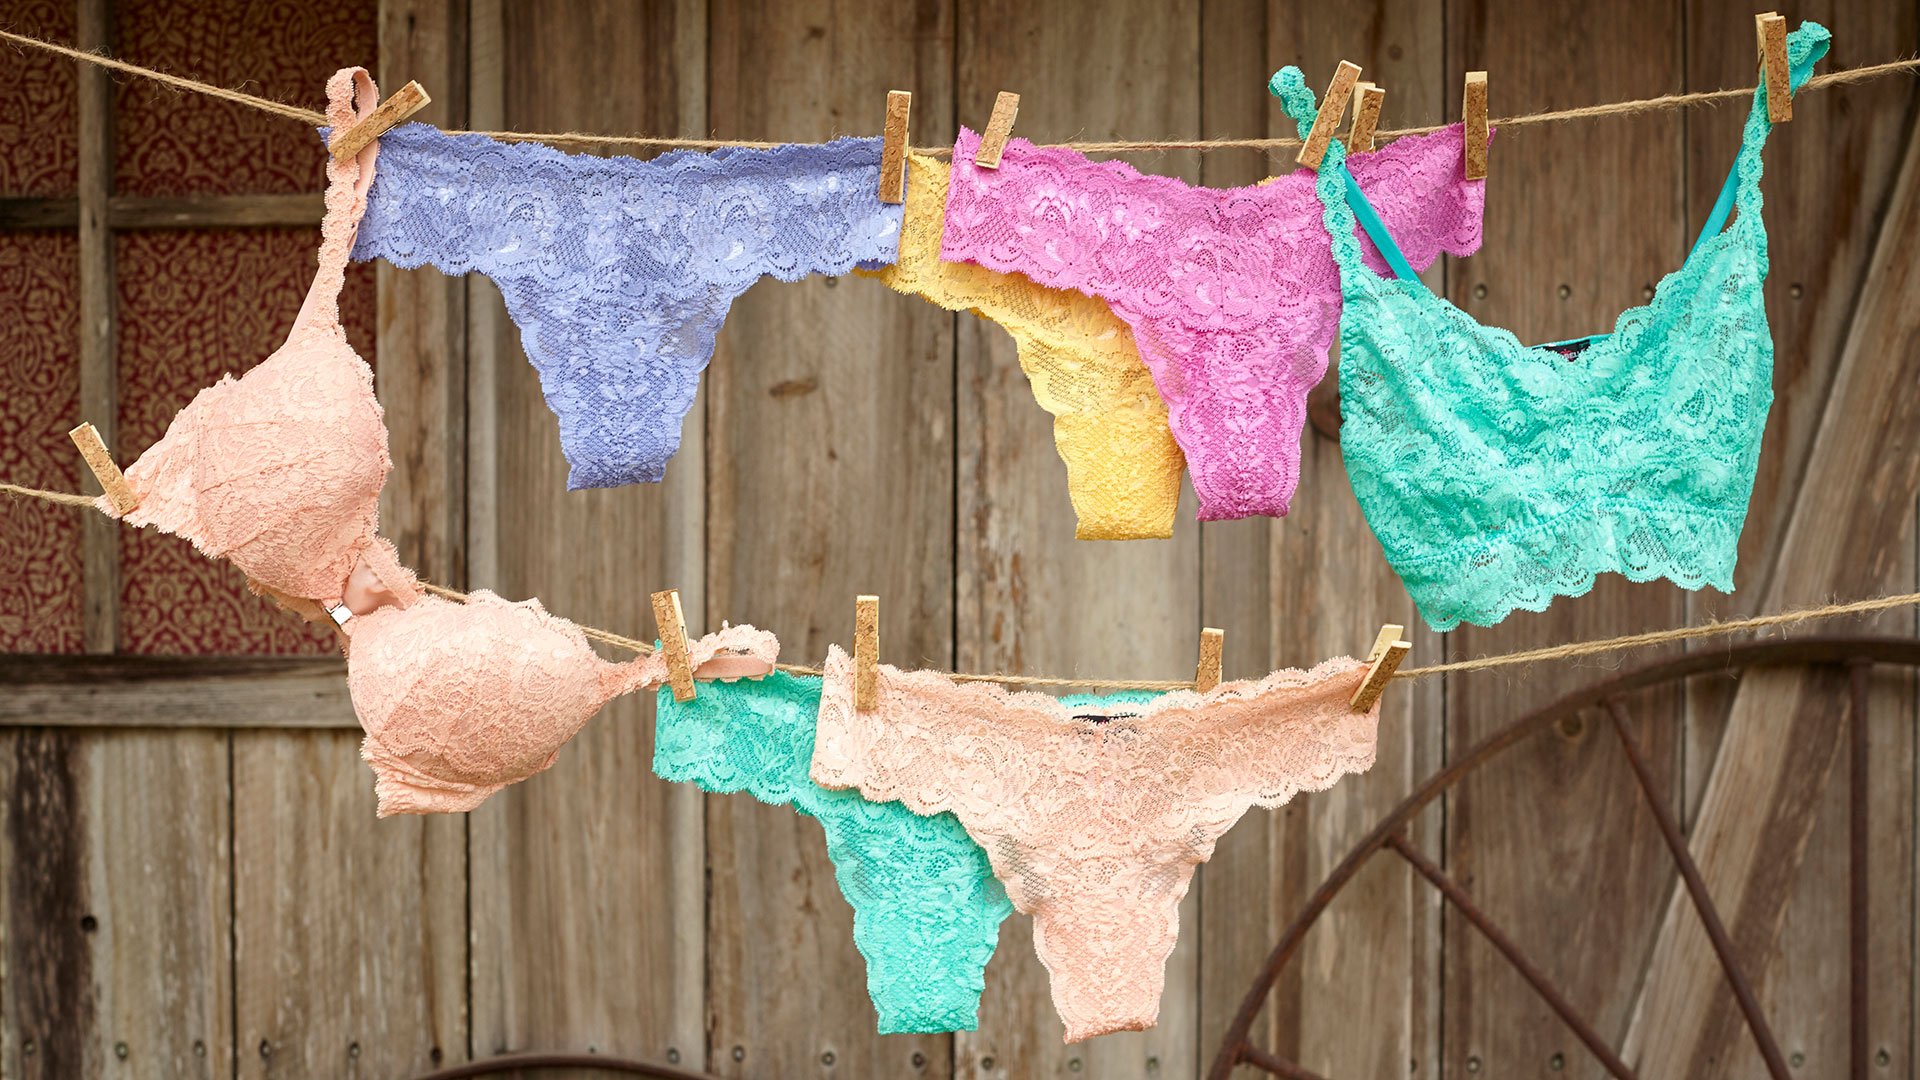 Lingerie hanging on clothes lines photographed by soft goods still life photographer Kate Benson.